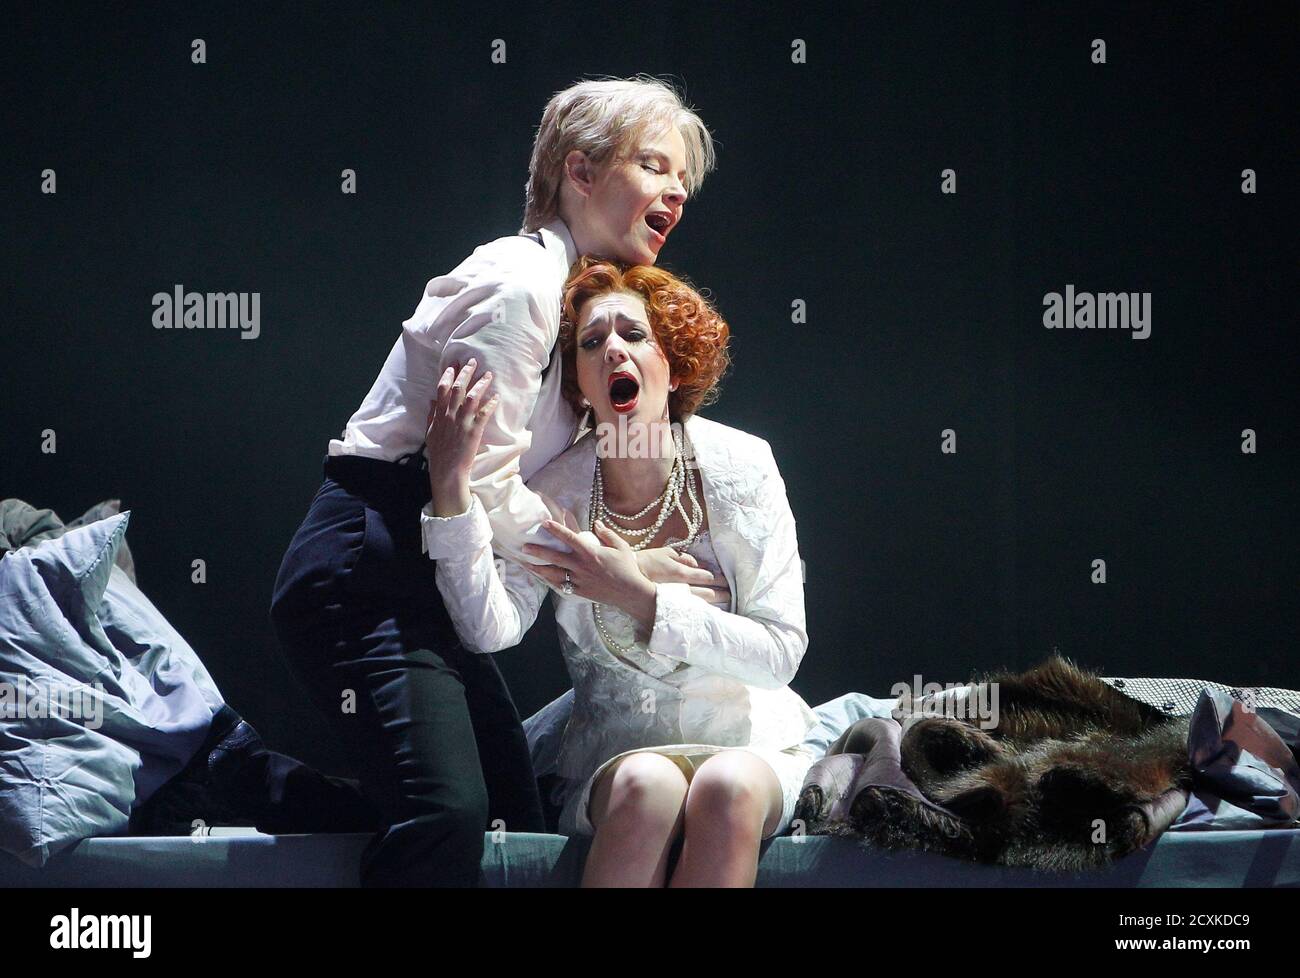 Singers Elina Garanca (L) and Juliane Banse perform on stage during a dress rehearsal of Wolfgang Amadeus Mozart's opera 'La clemenza di Tito' at the state opera in Vienna May 14, 2012. The opera is conducted by Louis Langree and will premiere on May 17, 2012.  REUTERS/Lisi Niesner  (AUSTRIA - Tags: ENTERTAINMENT) Stock Photo